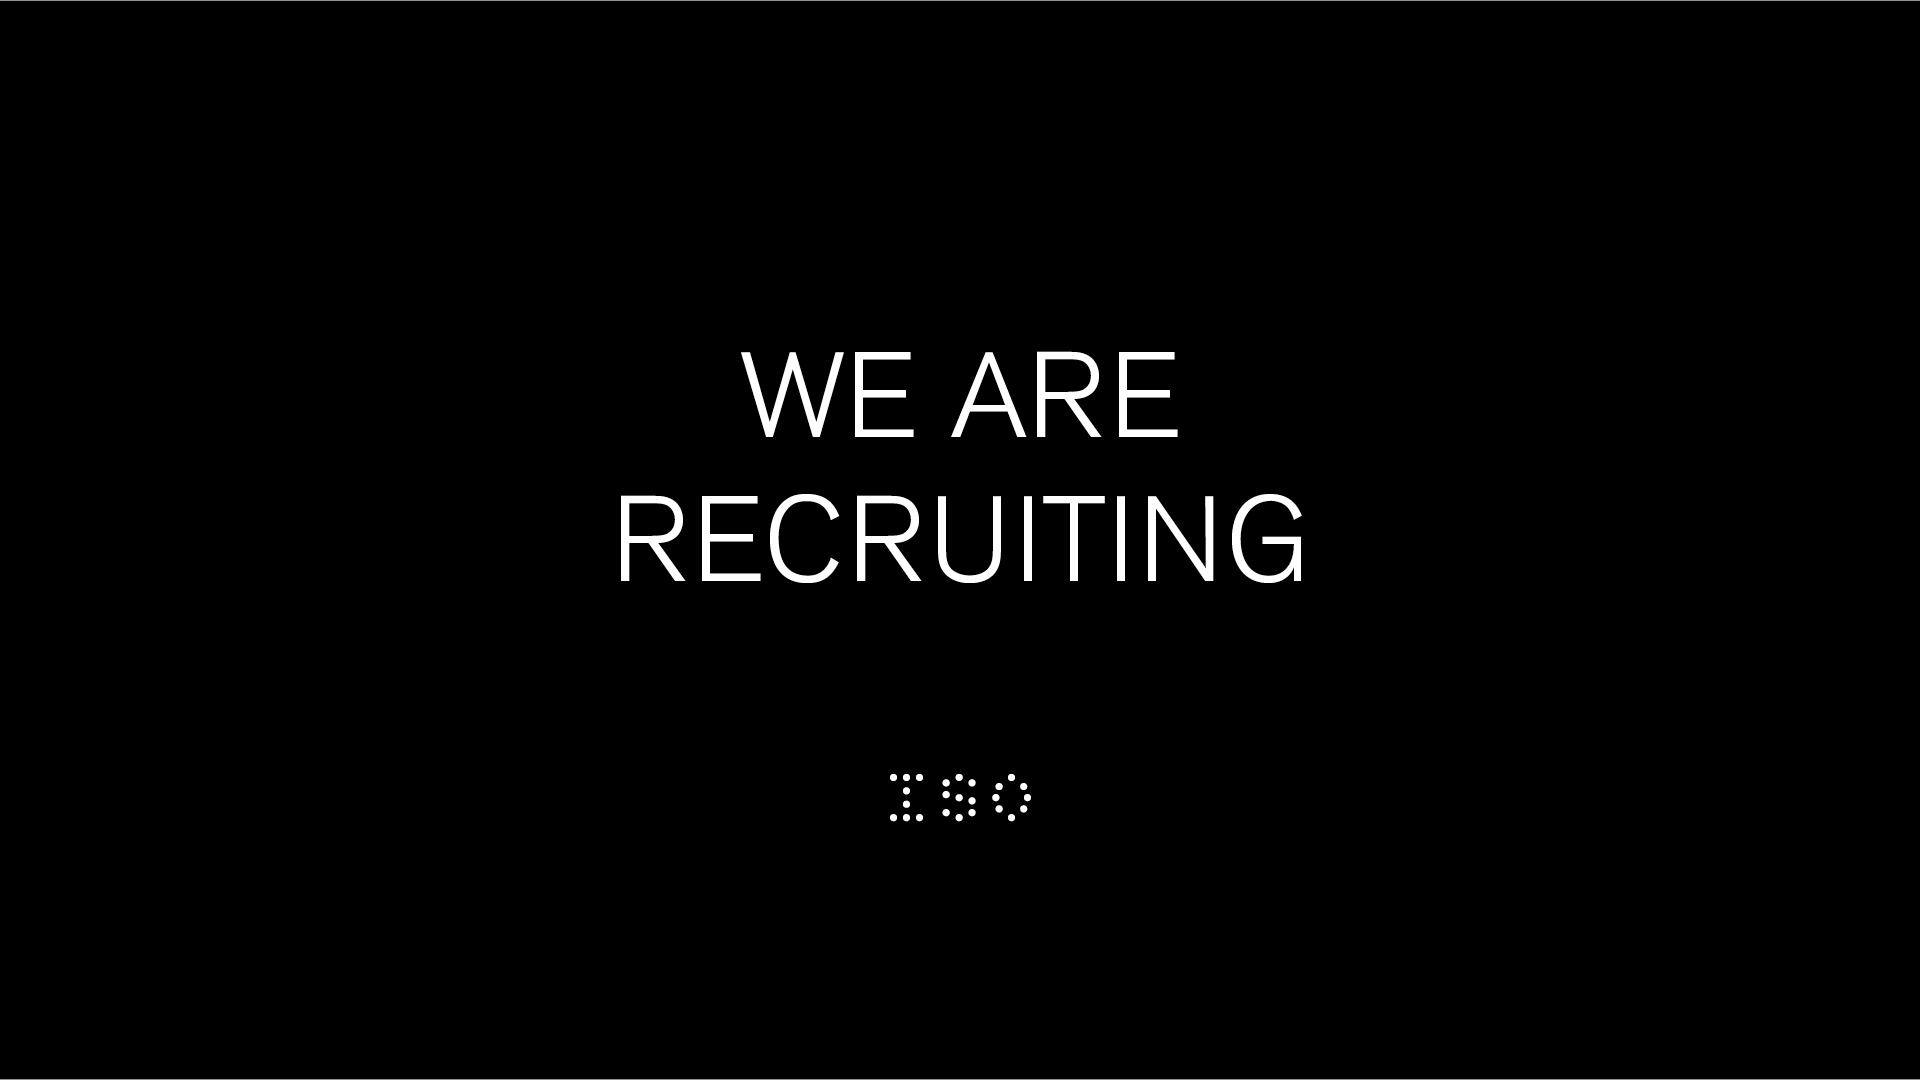 We_Are_Recruiting_Web_News_1